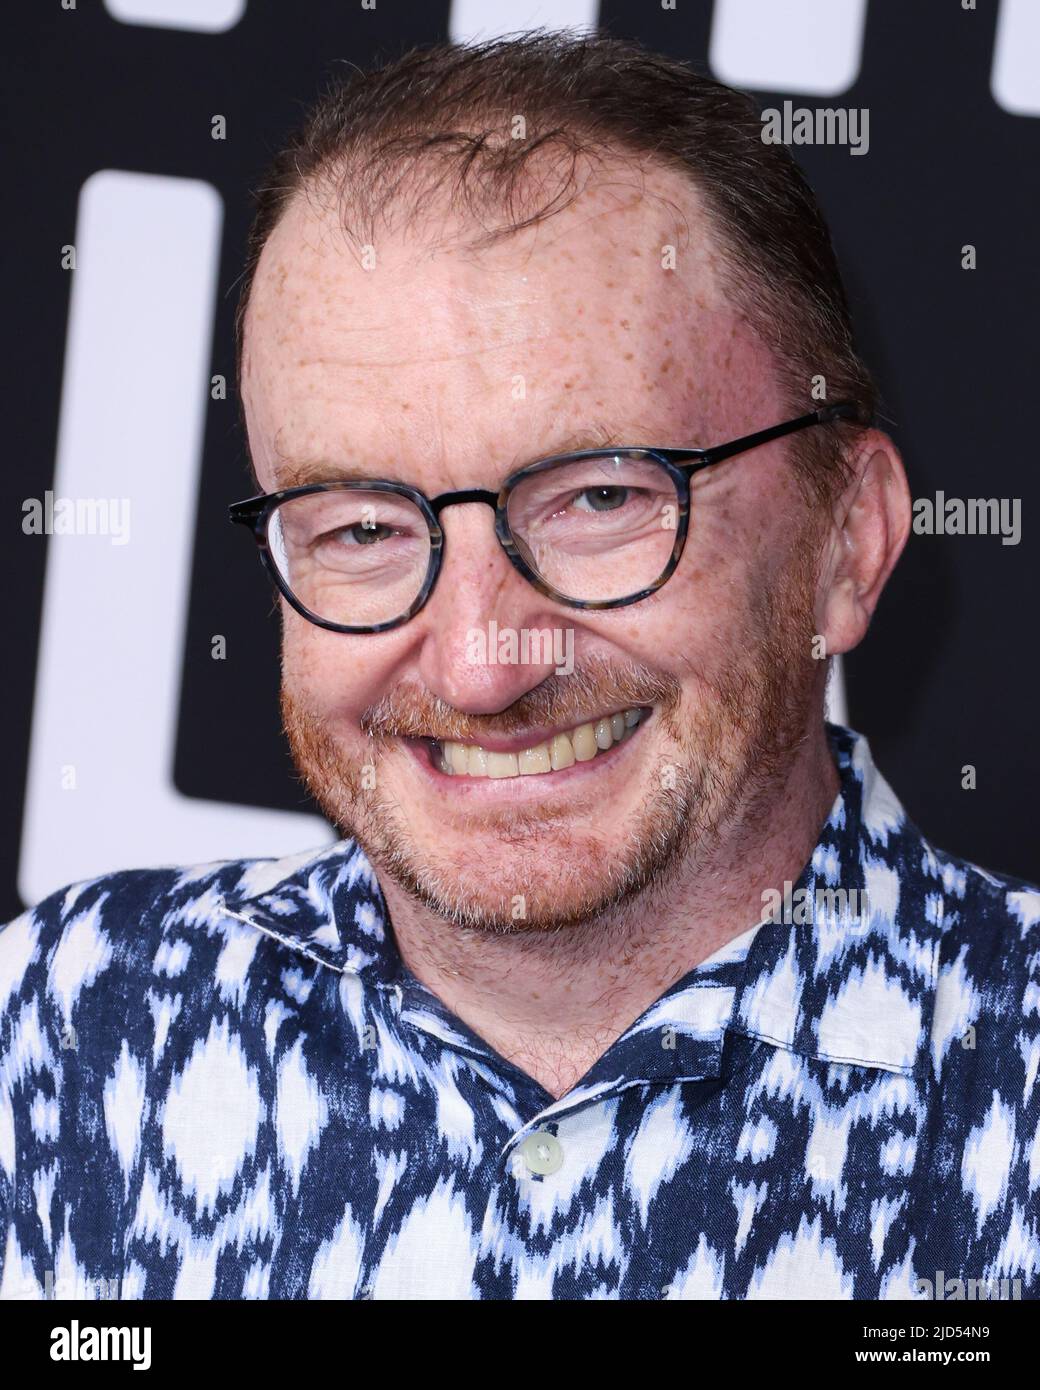 WEST HOLLYWOOD, LOS ANGELES, CALIFORNIA, USA - JUNE 17: Canadian actor Ken Hall arrives at the World Premiere Of Netflix's 'The Umbrella Academy' Season 3 held at The London West Hollywood at Beverly Hills on June 17, 2022 in West Hollywood, Los Angeles, California, USA. (Photo by Xavier Collin/Image Press Agency) Stock Photo